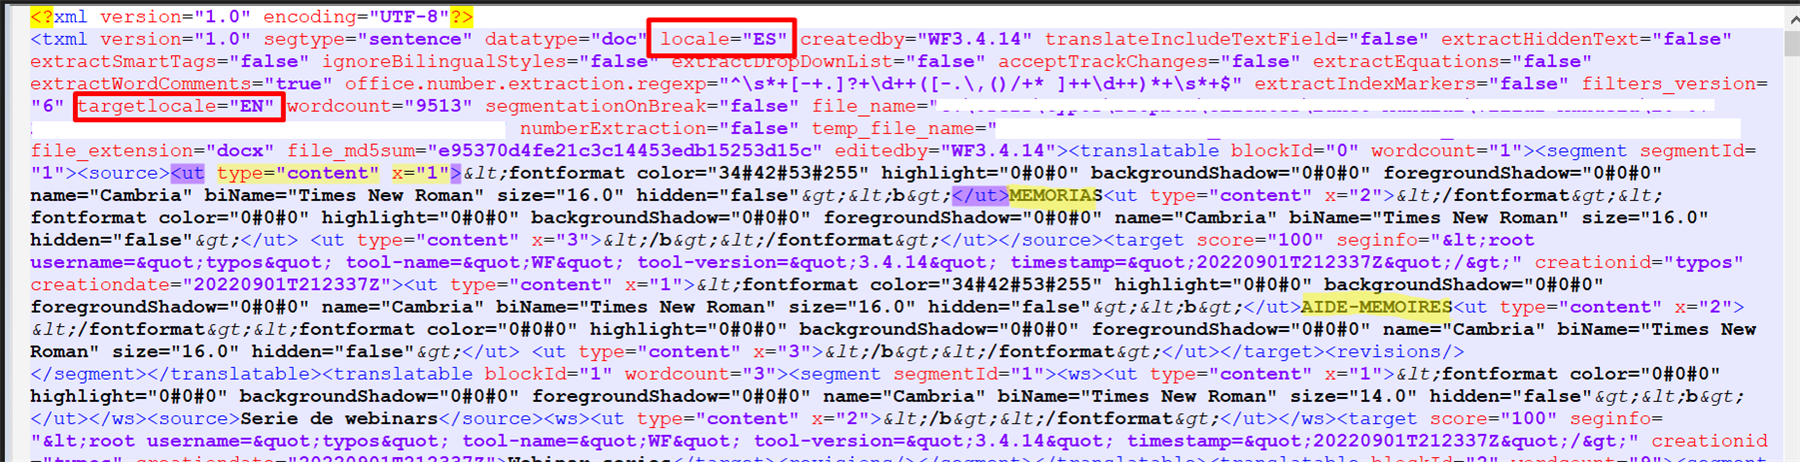 Screenshot of an XML code snippet with UTF-8 encoding and various attributes such as locale set to 'ES' for Spanish and target locale set to 'EN' for English.